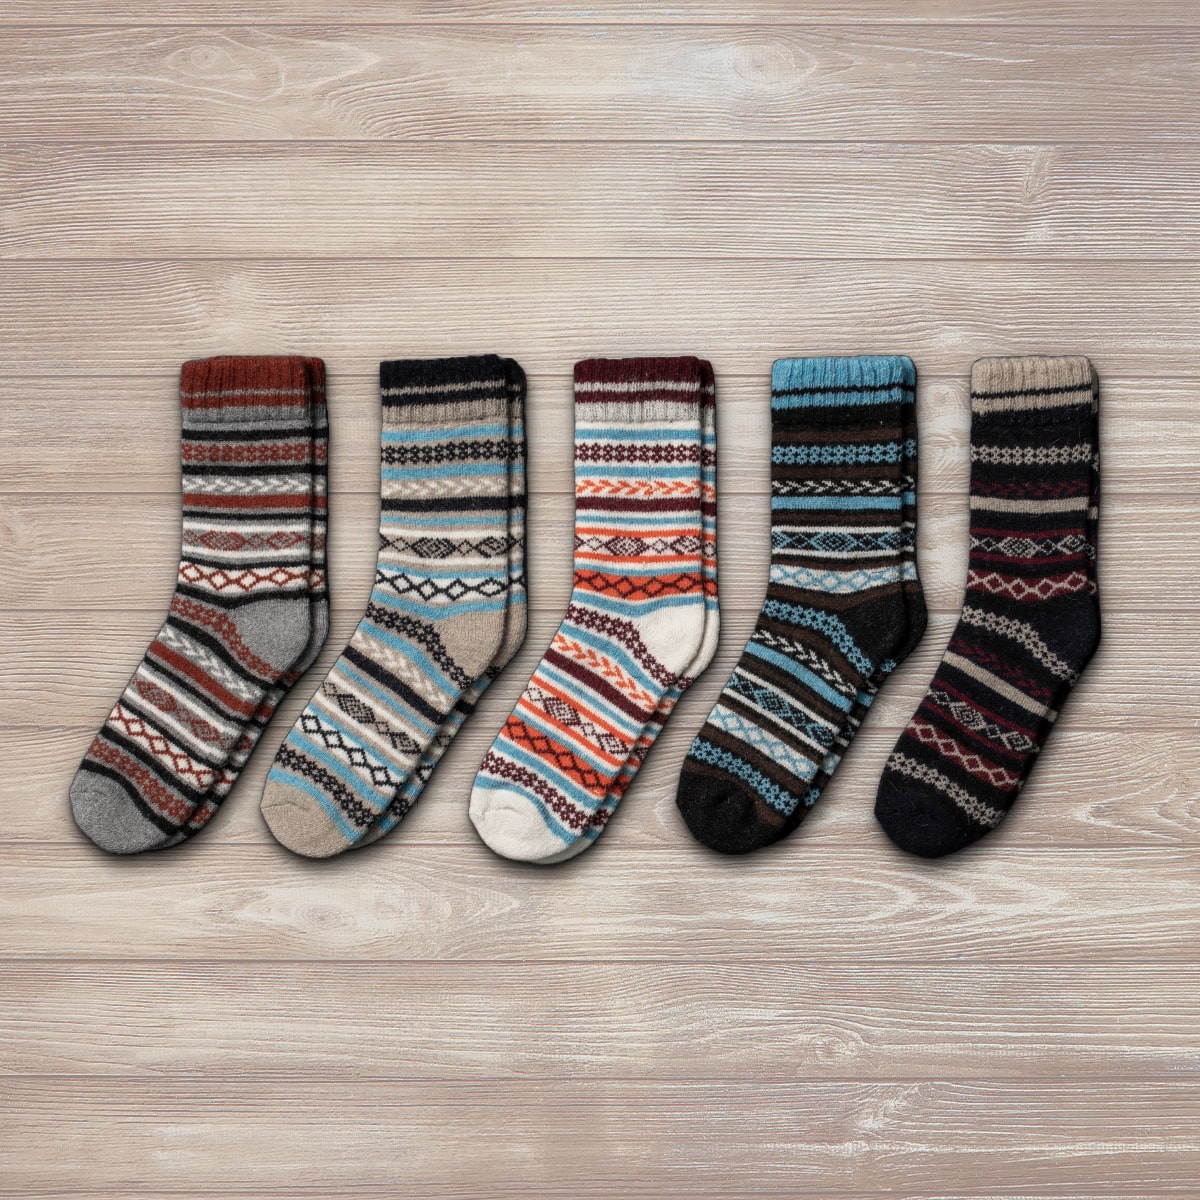 Choosing the Right Material for Your Socks - Nordic Socks US